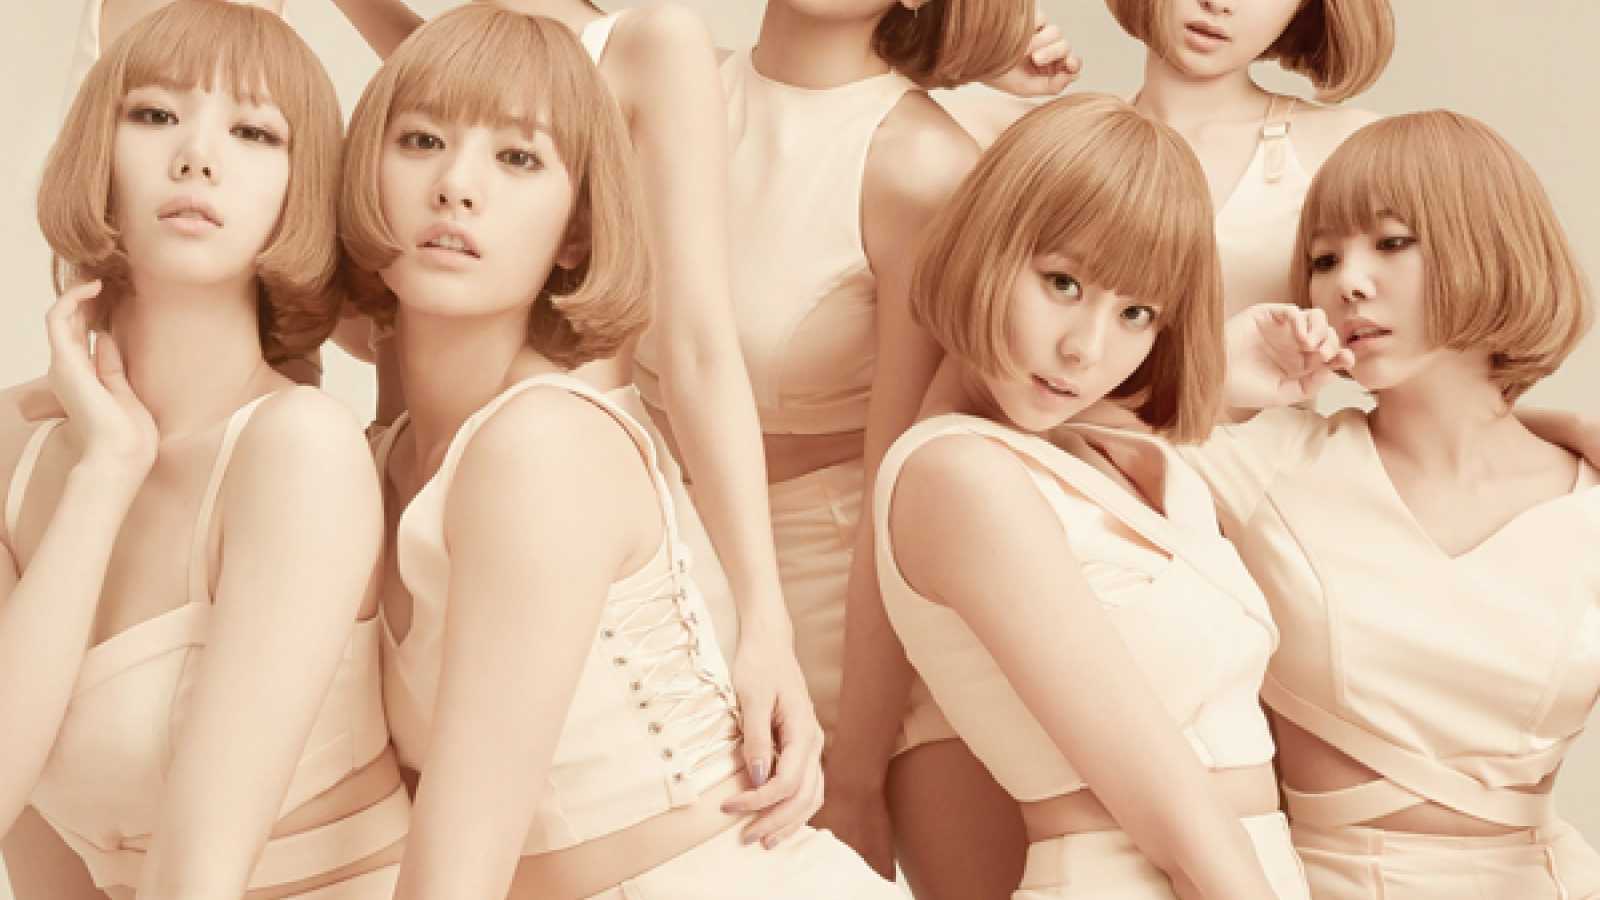 After School © Pledis Entertainment. All rights reserved